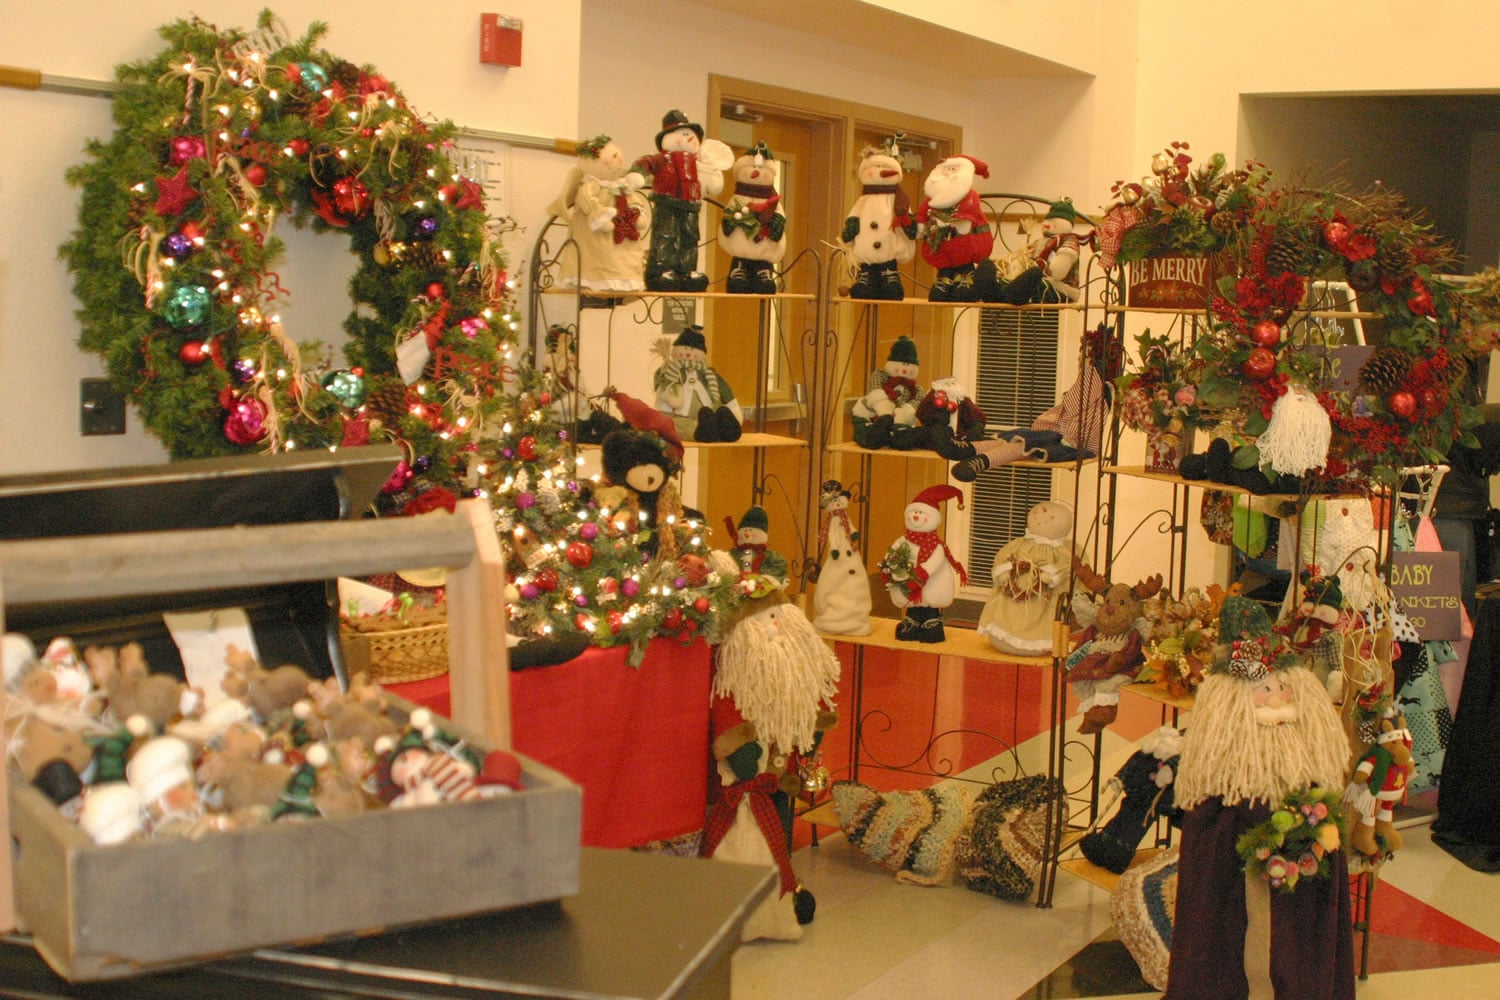 There are goodies galore at the Holly Days Arts and Crafts Bazaar at Liberty Middle School in Camas. This year the event will be held Nov.